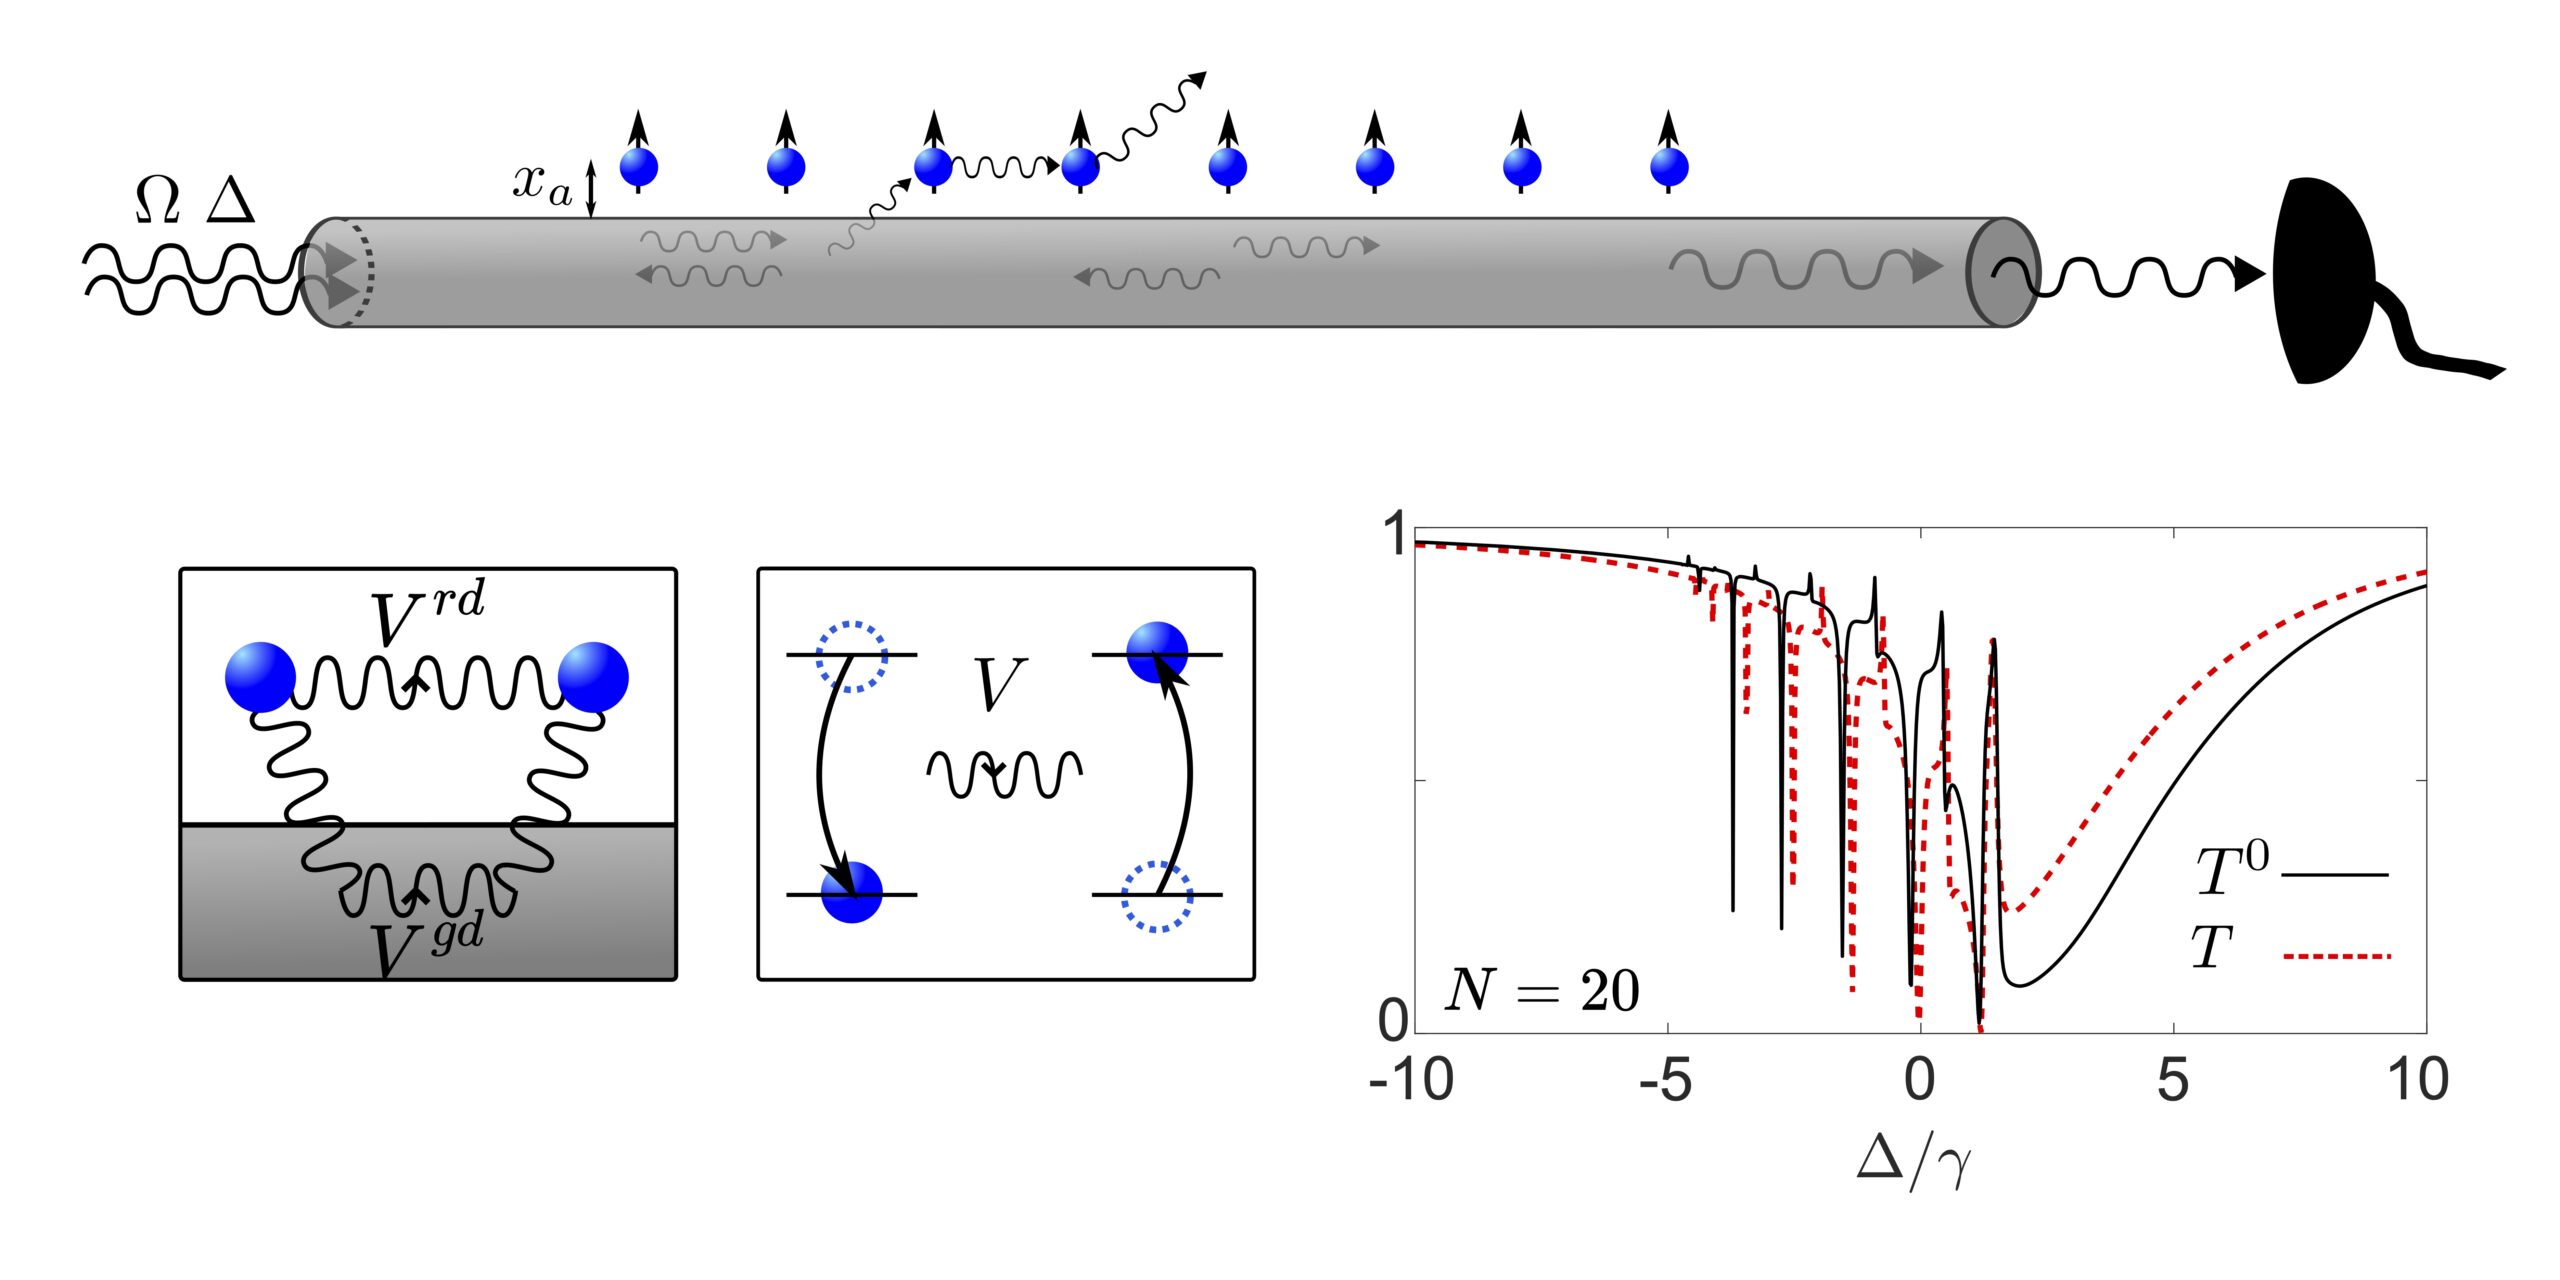 Modified dipole-dipole interactions in the presence of a nanophotonic waveguide